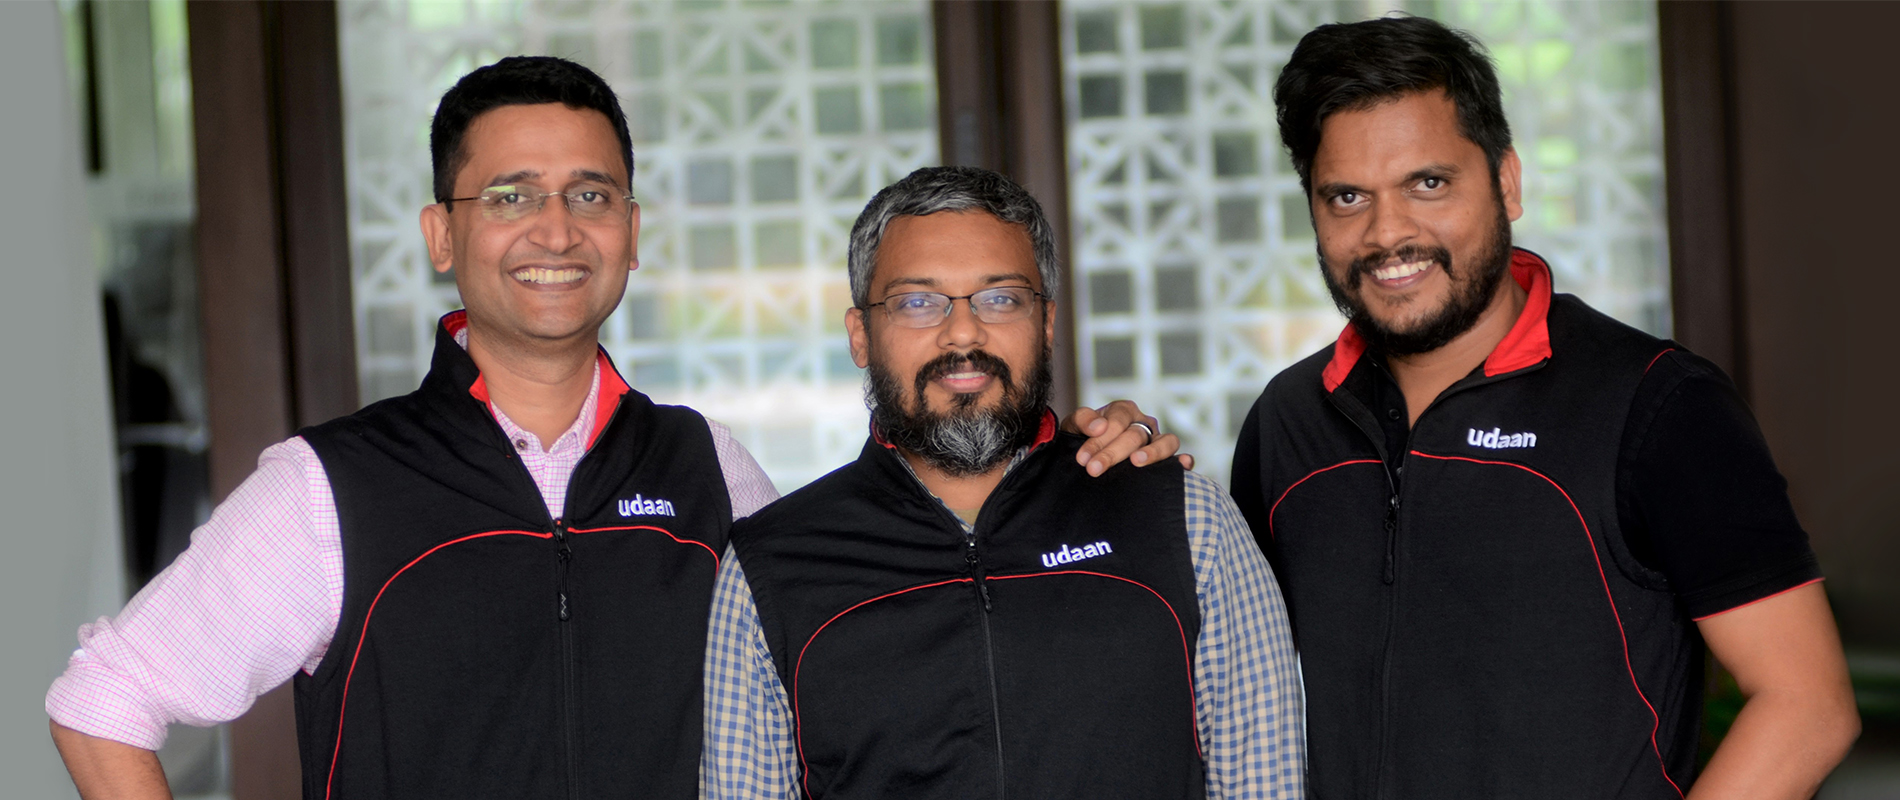 Founded by Amod Malviya, Vaibhav Gupta, and Sujeet Kumar (pictured above from left to right)